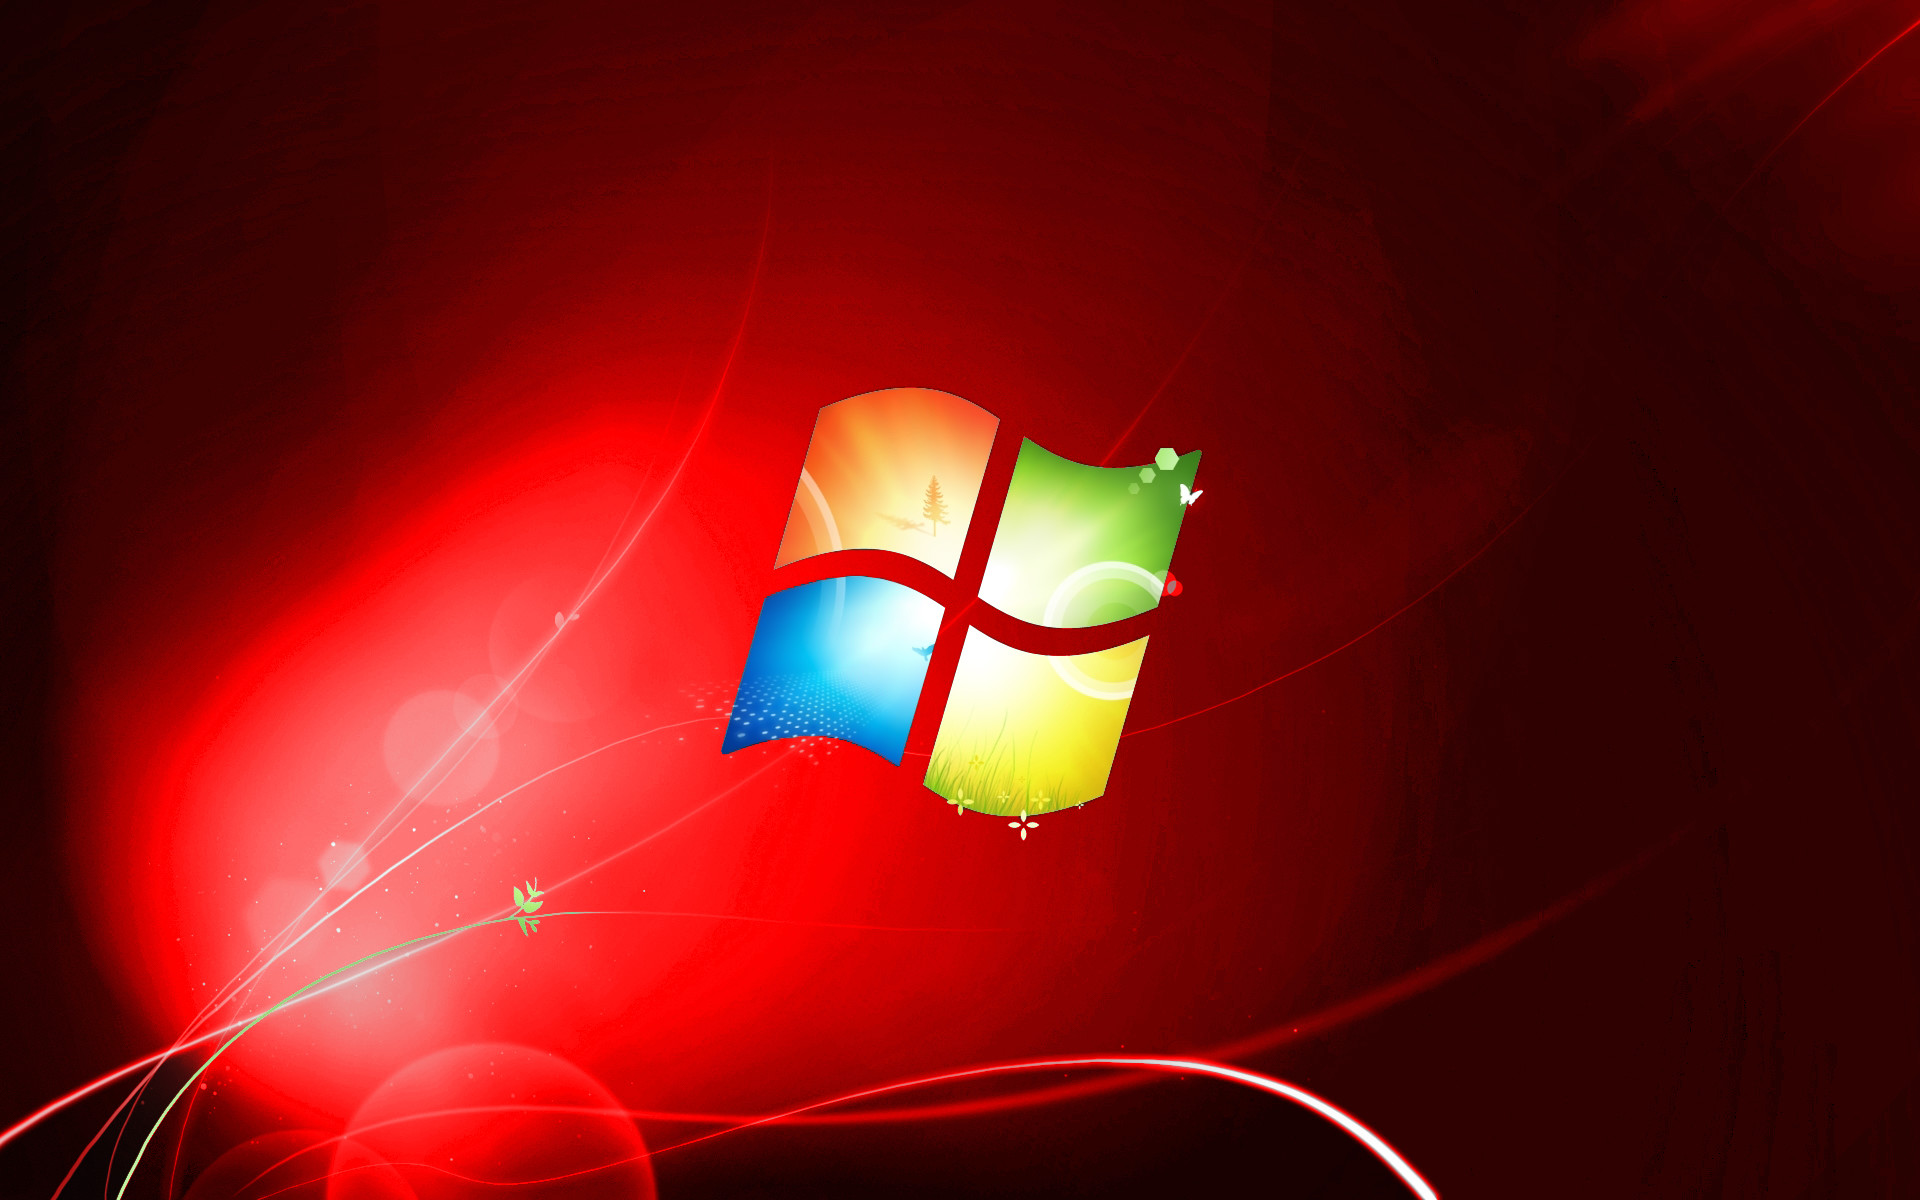 1920x1200 windows 7 wallpaper black and red download